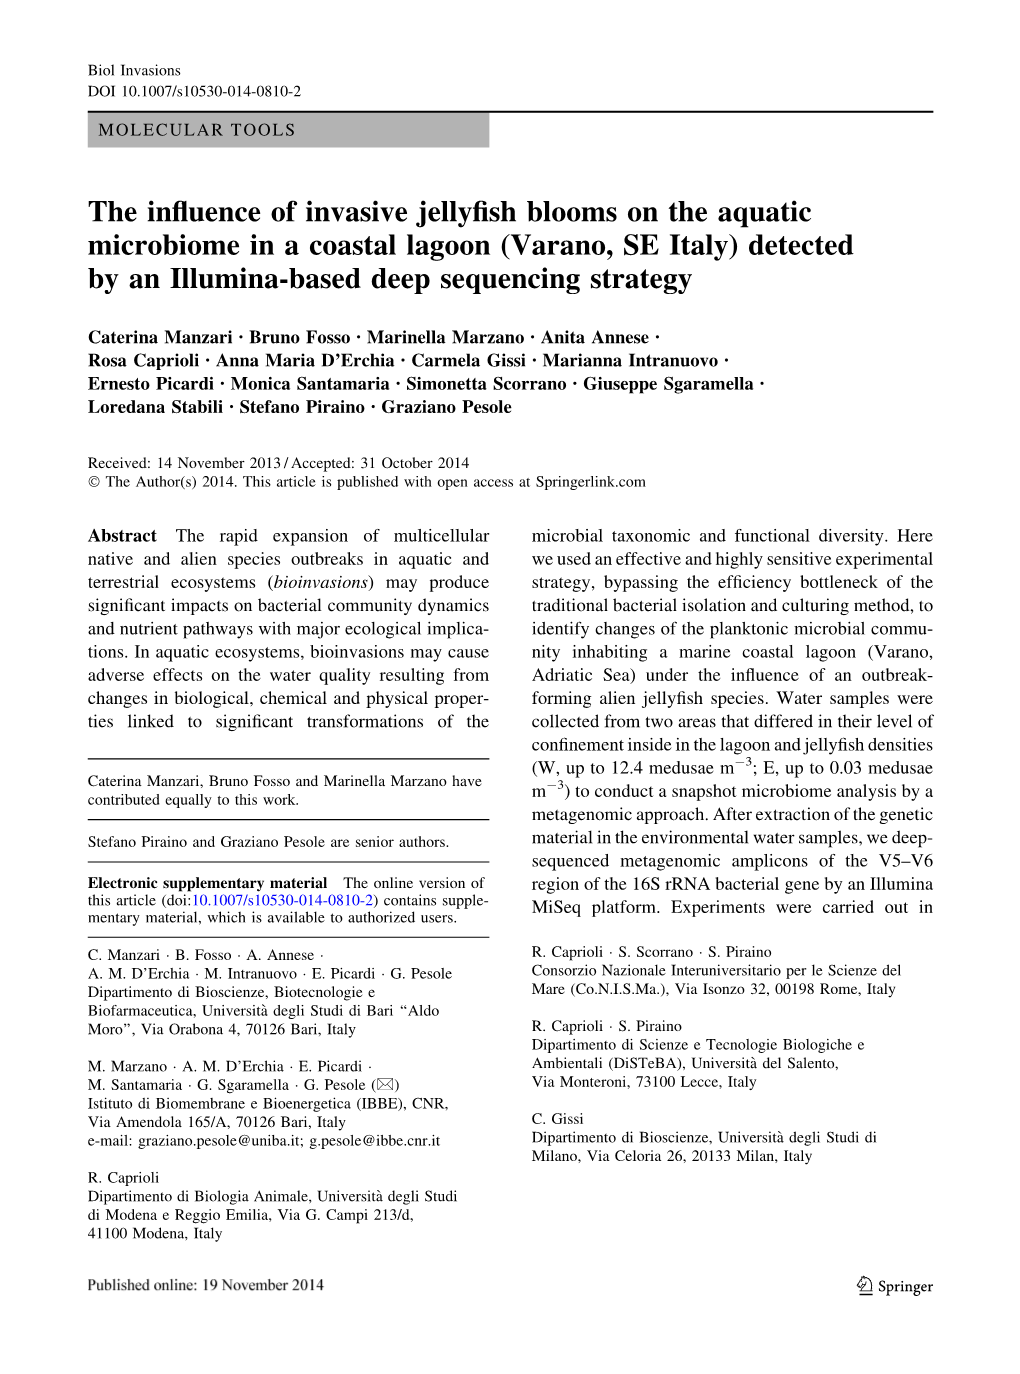 The Influence of Invasive Jellyfish Blooms on The